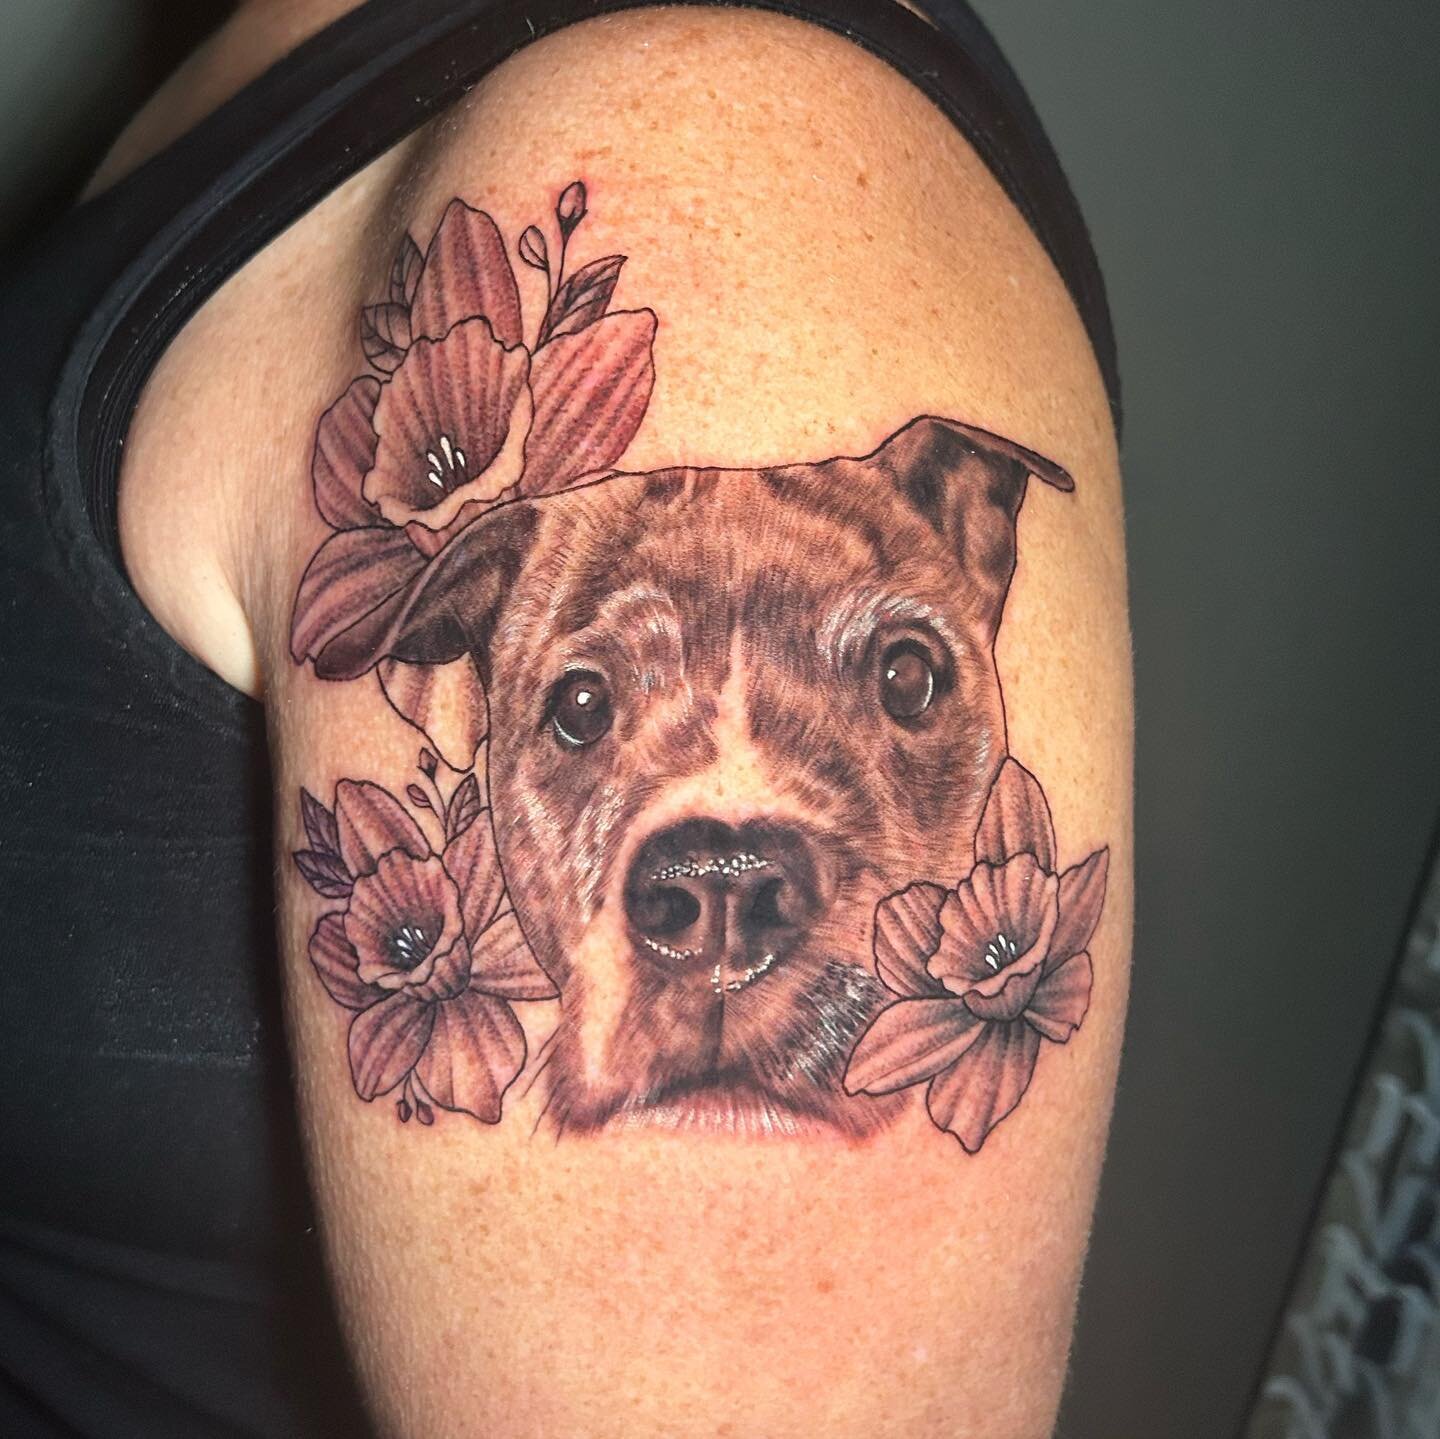 Dog portrait🙌🏽🙌🏽 No better way to appreciate a member of the family than with some Ink 🙏🏽🙏🏽

Done here @adornmentbodyart !!! Dm or Txt (760)993-8455 for appointments 🤟🏽🤟🏽

#dripfornia&trade;️💦 #adornmenttattooandpiercing #bng #bnginksoci